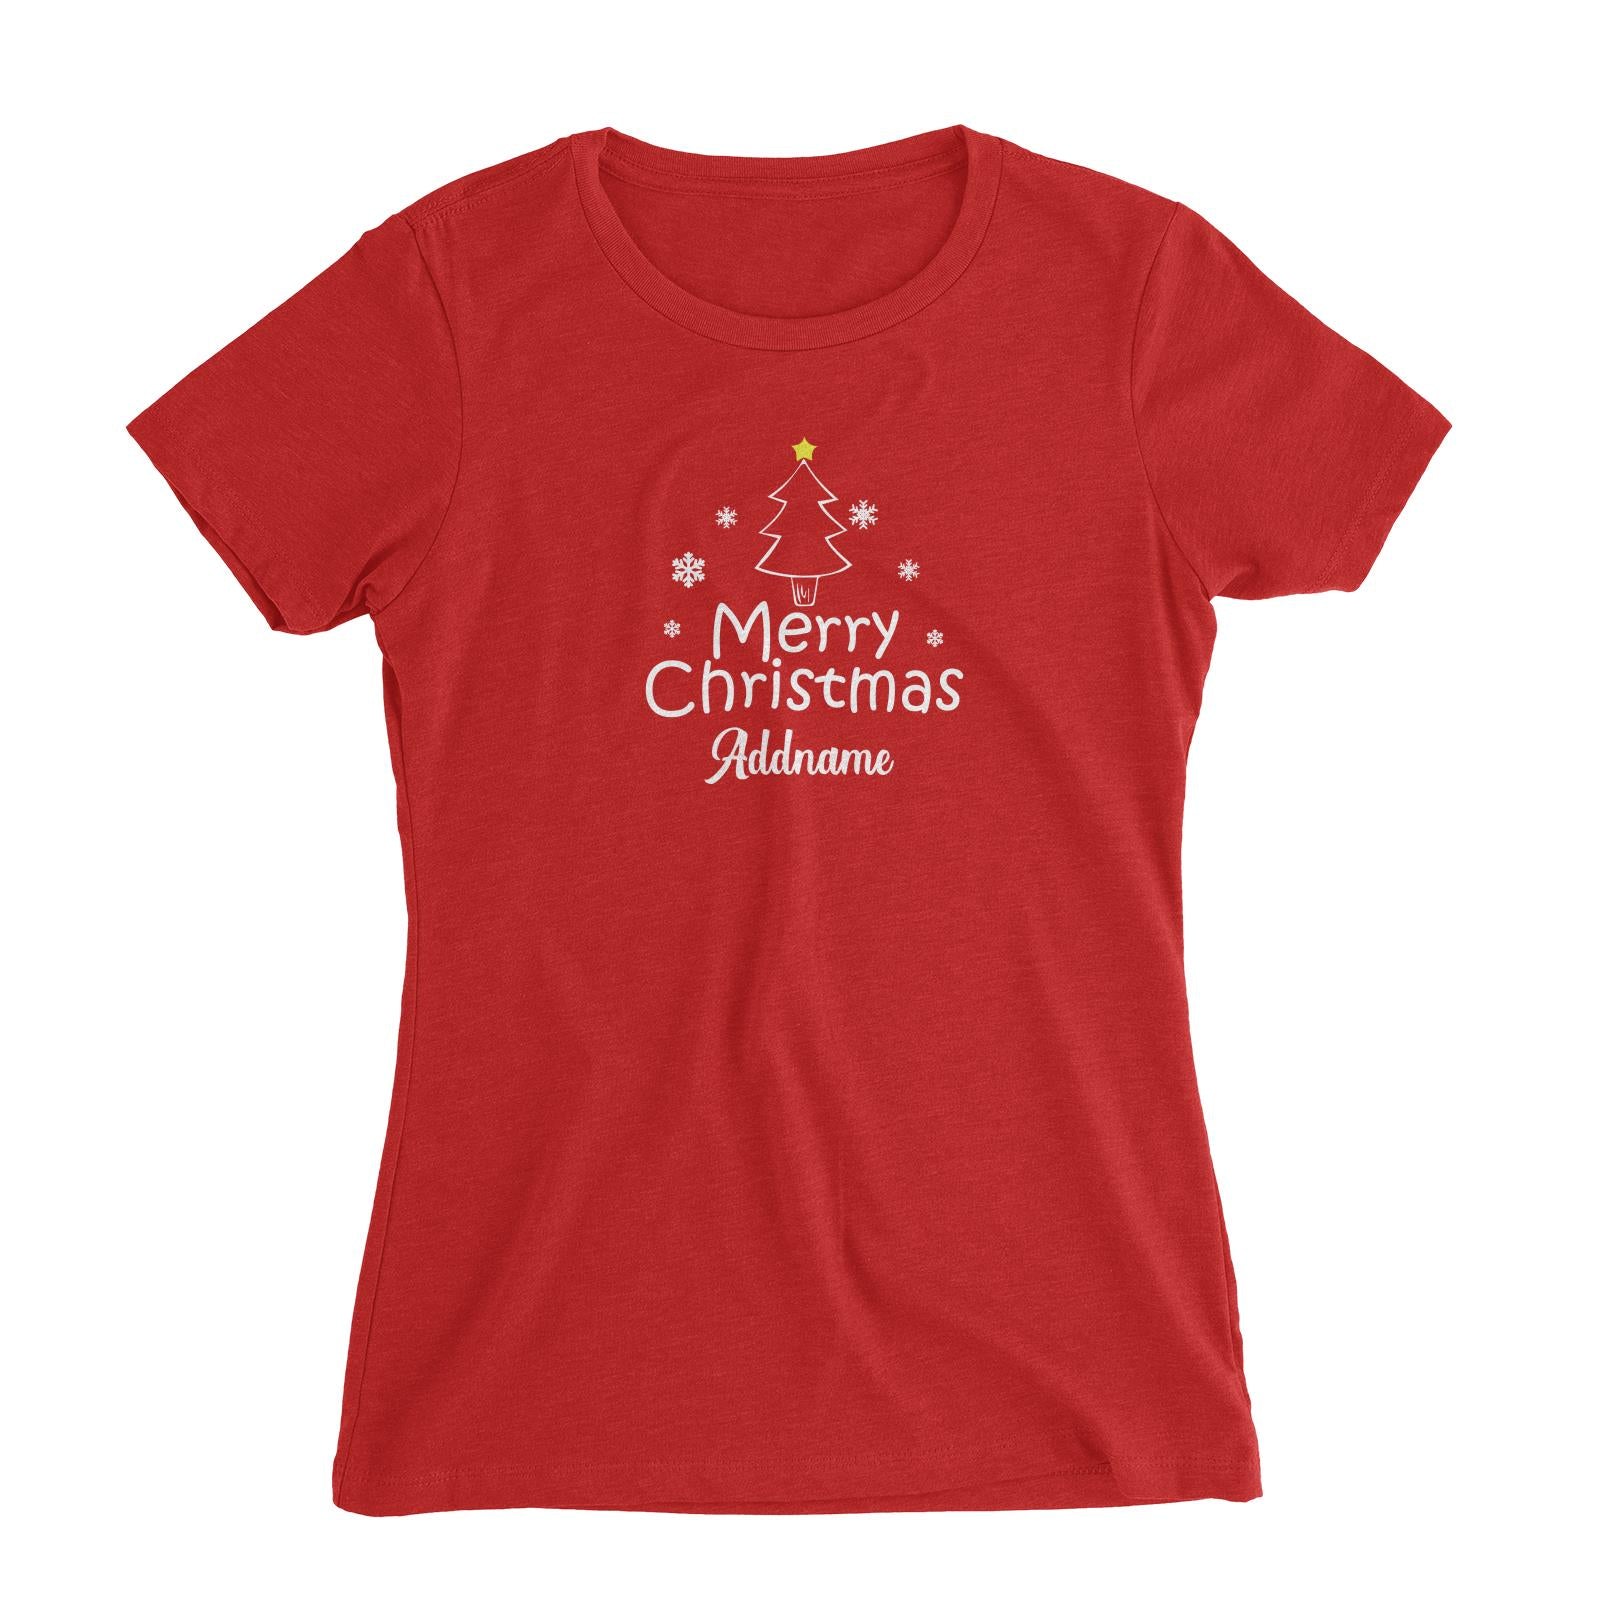 Christmas Series Merry Christmas Tree with Snowflakes Women's Slim Fit T-Shirt